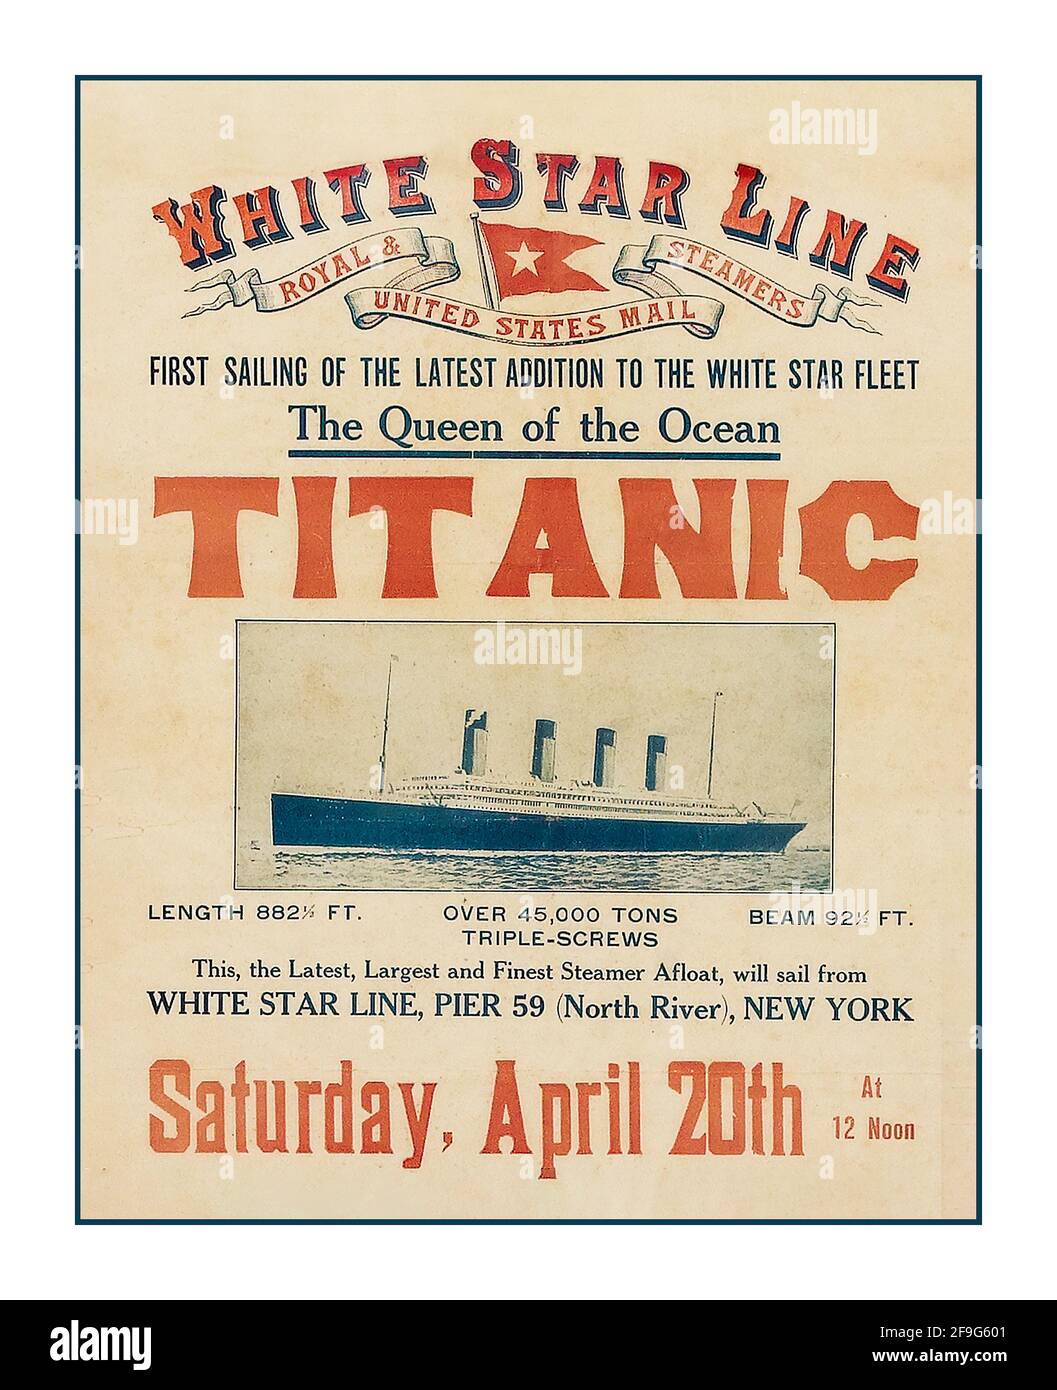 TITANIC Vintage 1900's Poster advertising the first sailing of Titanic from  New York April 20th 1912 RMS Titanic tragically sank en-route on April 15th  1912 RMS Titanic was a British passenger liner